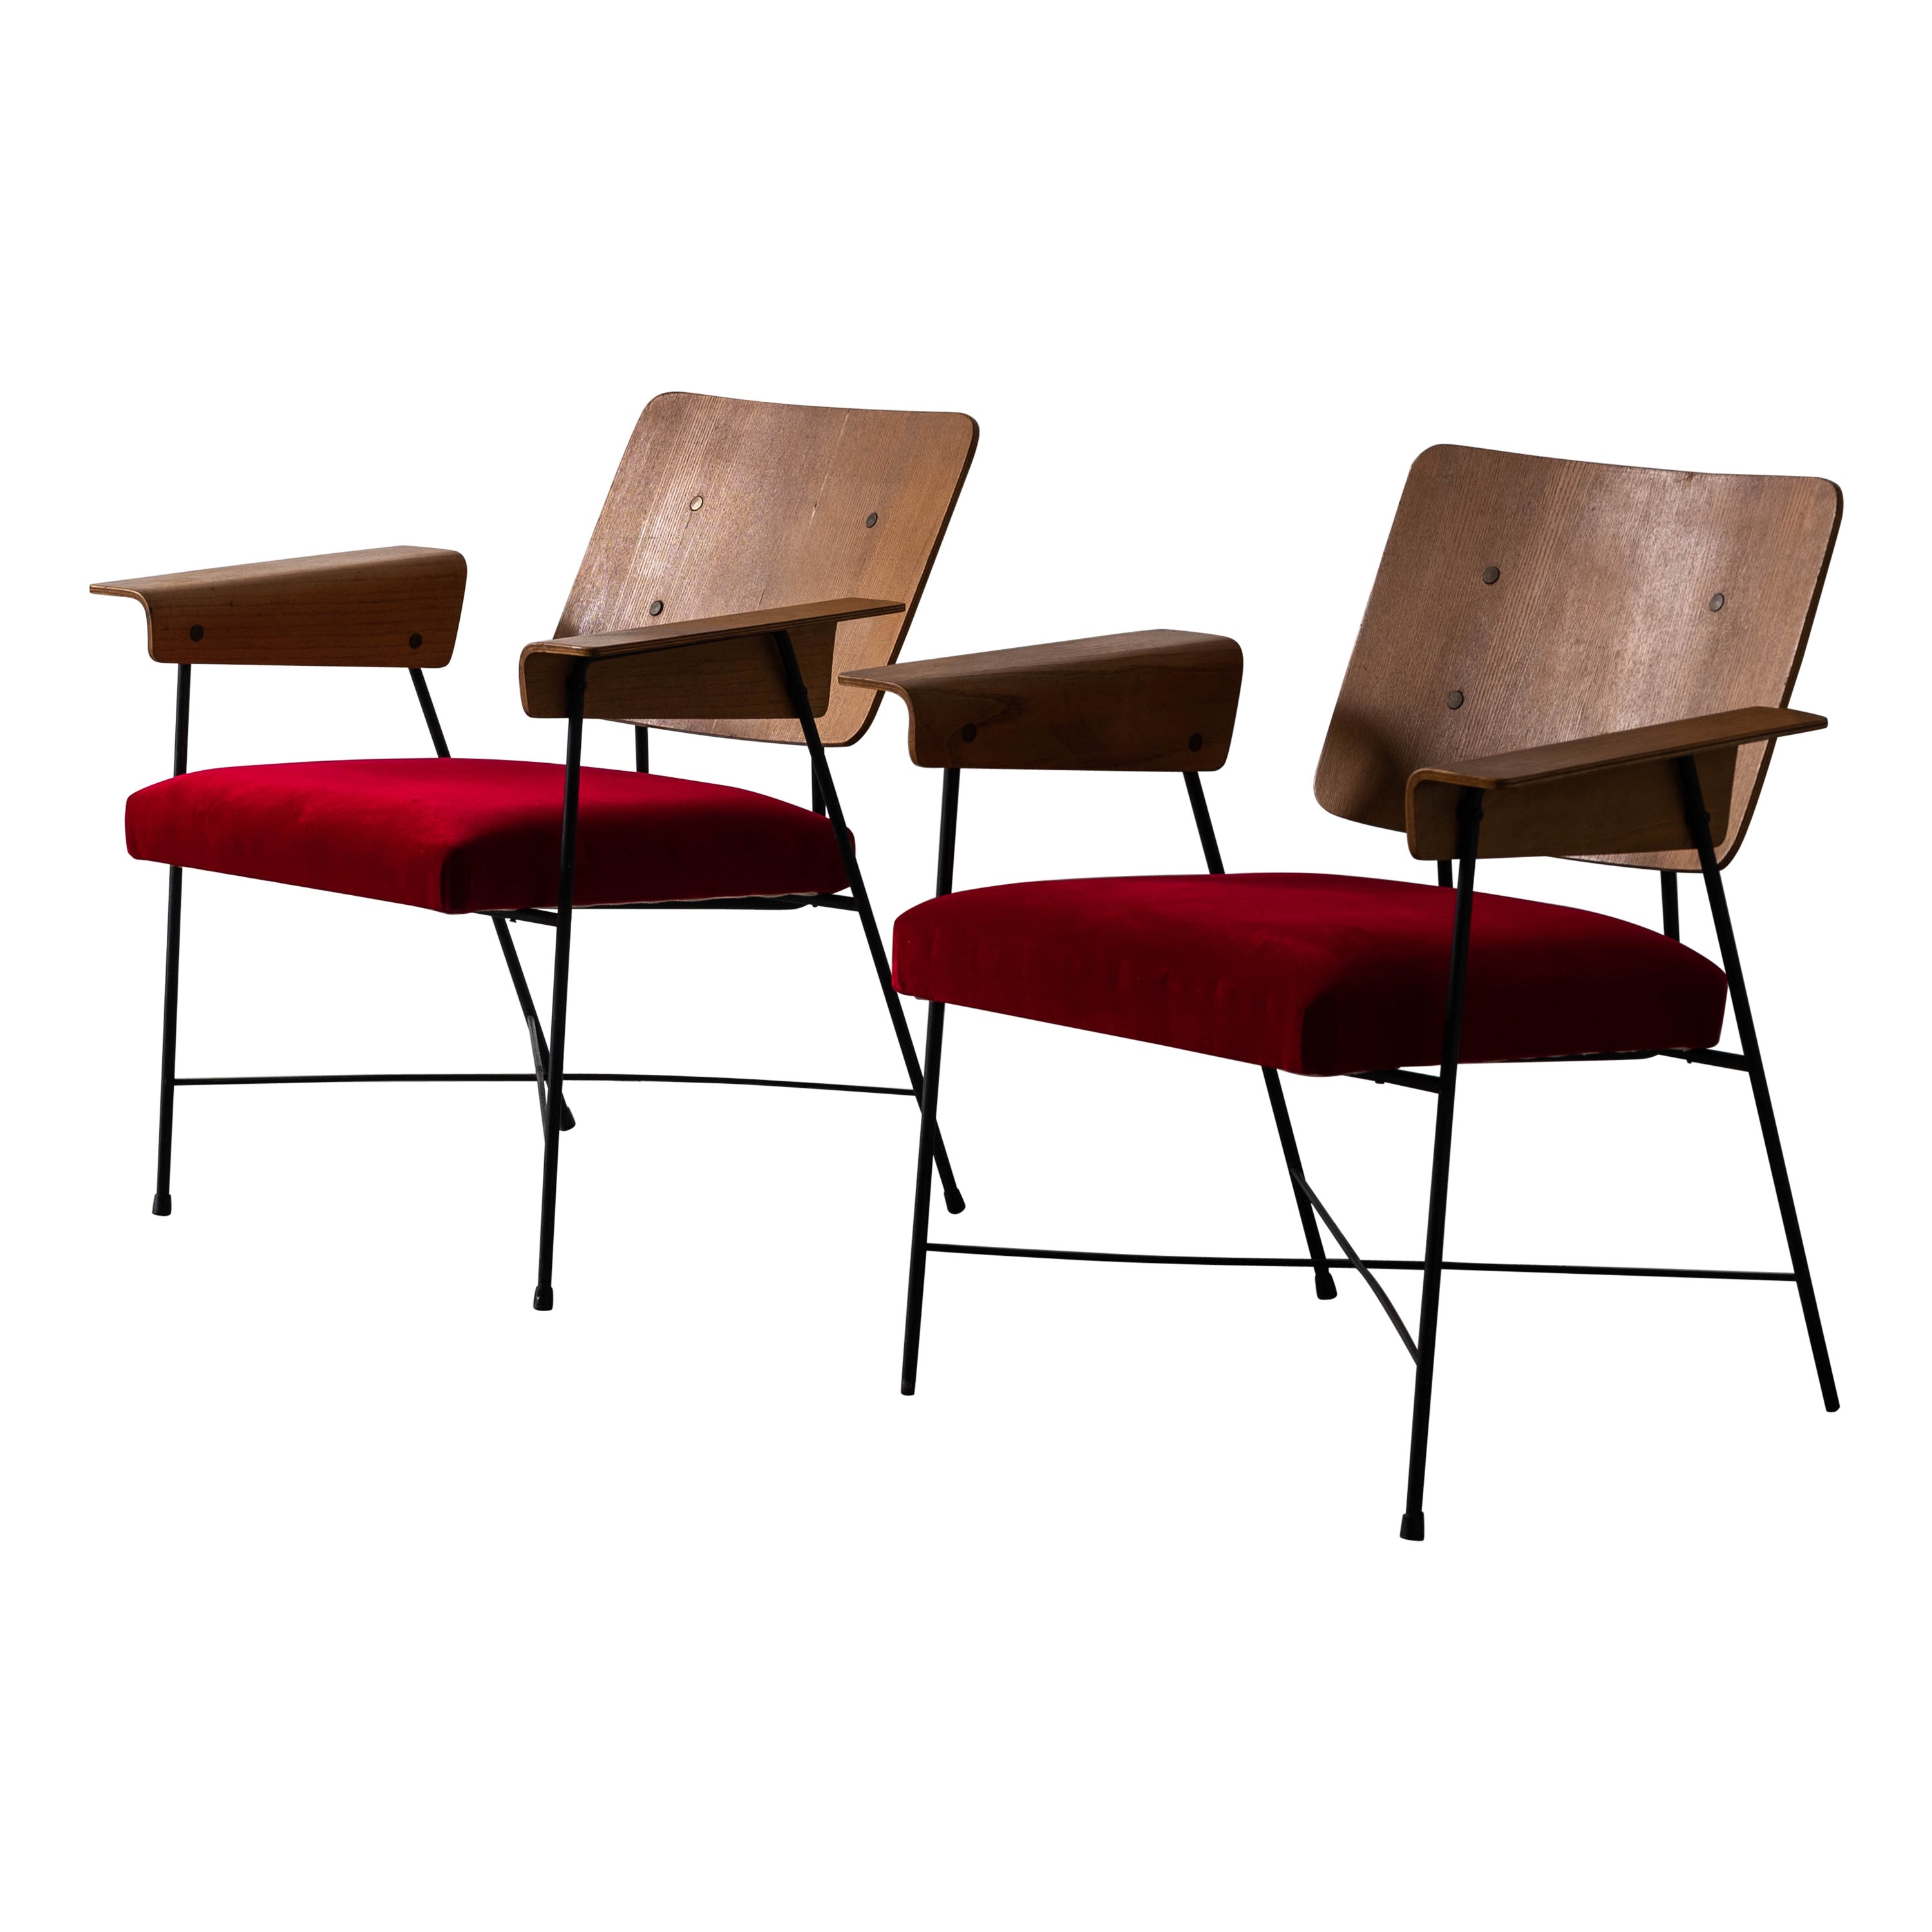 George Coslin, Lounge Chairs, Metal, Red Fabric, Plywood, Italy, 1960s For Sale